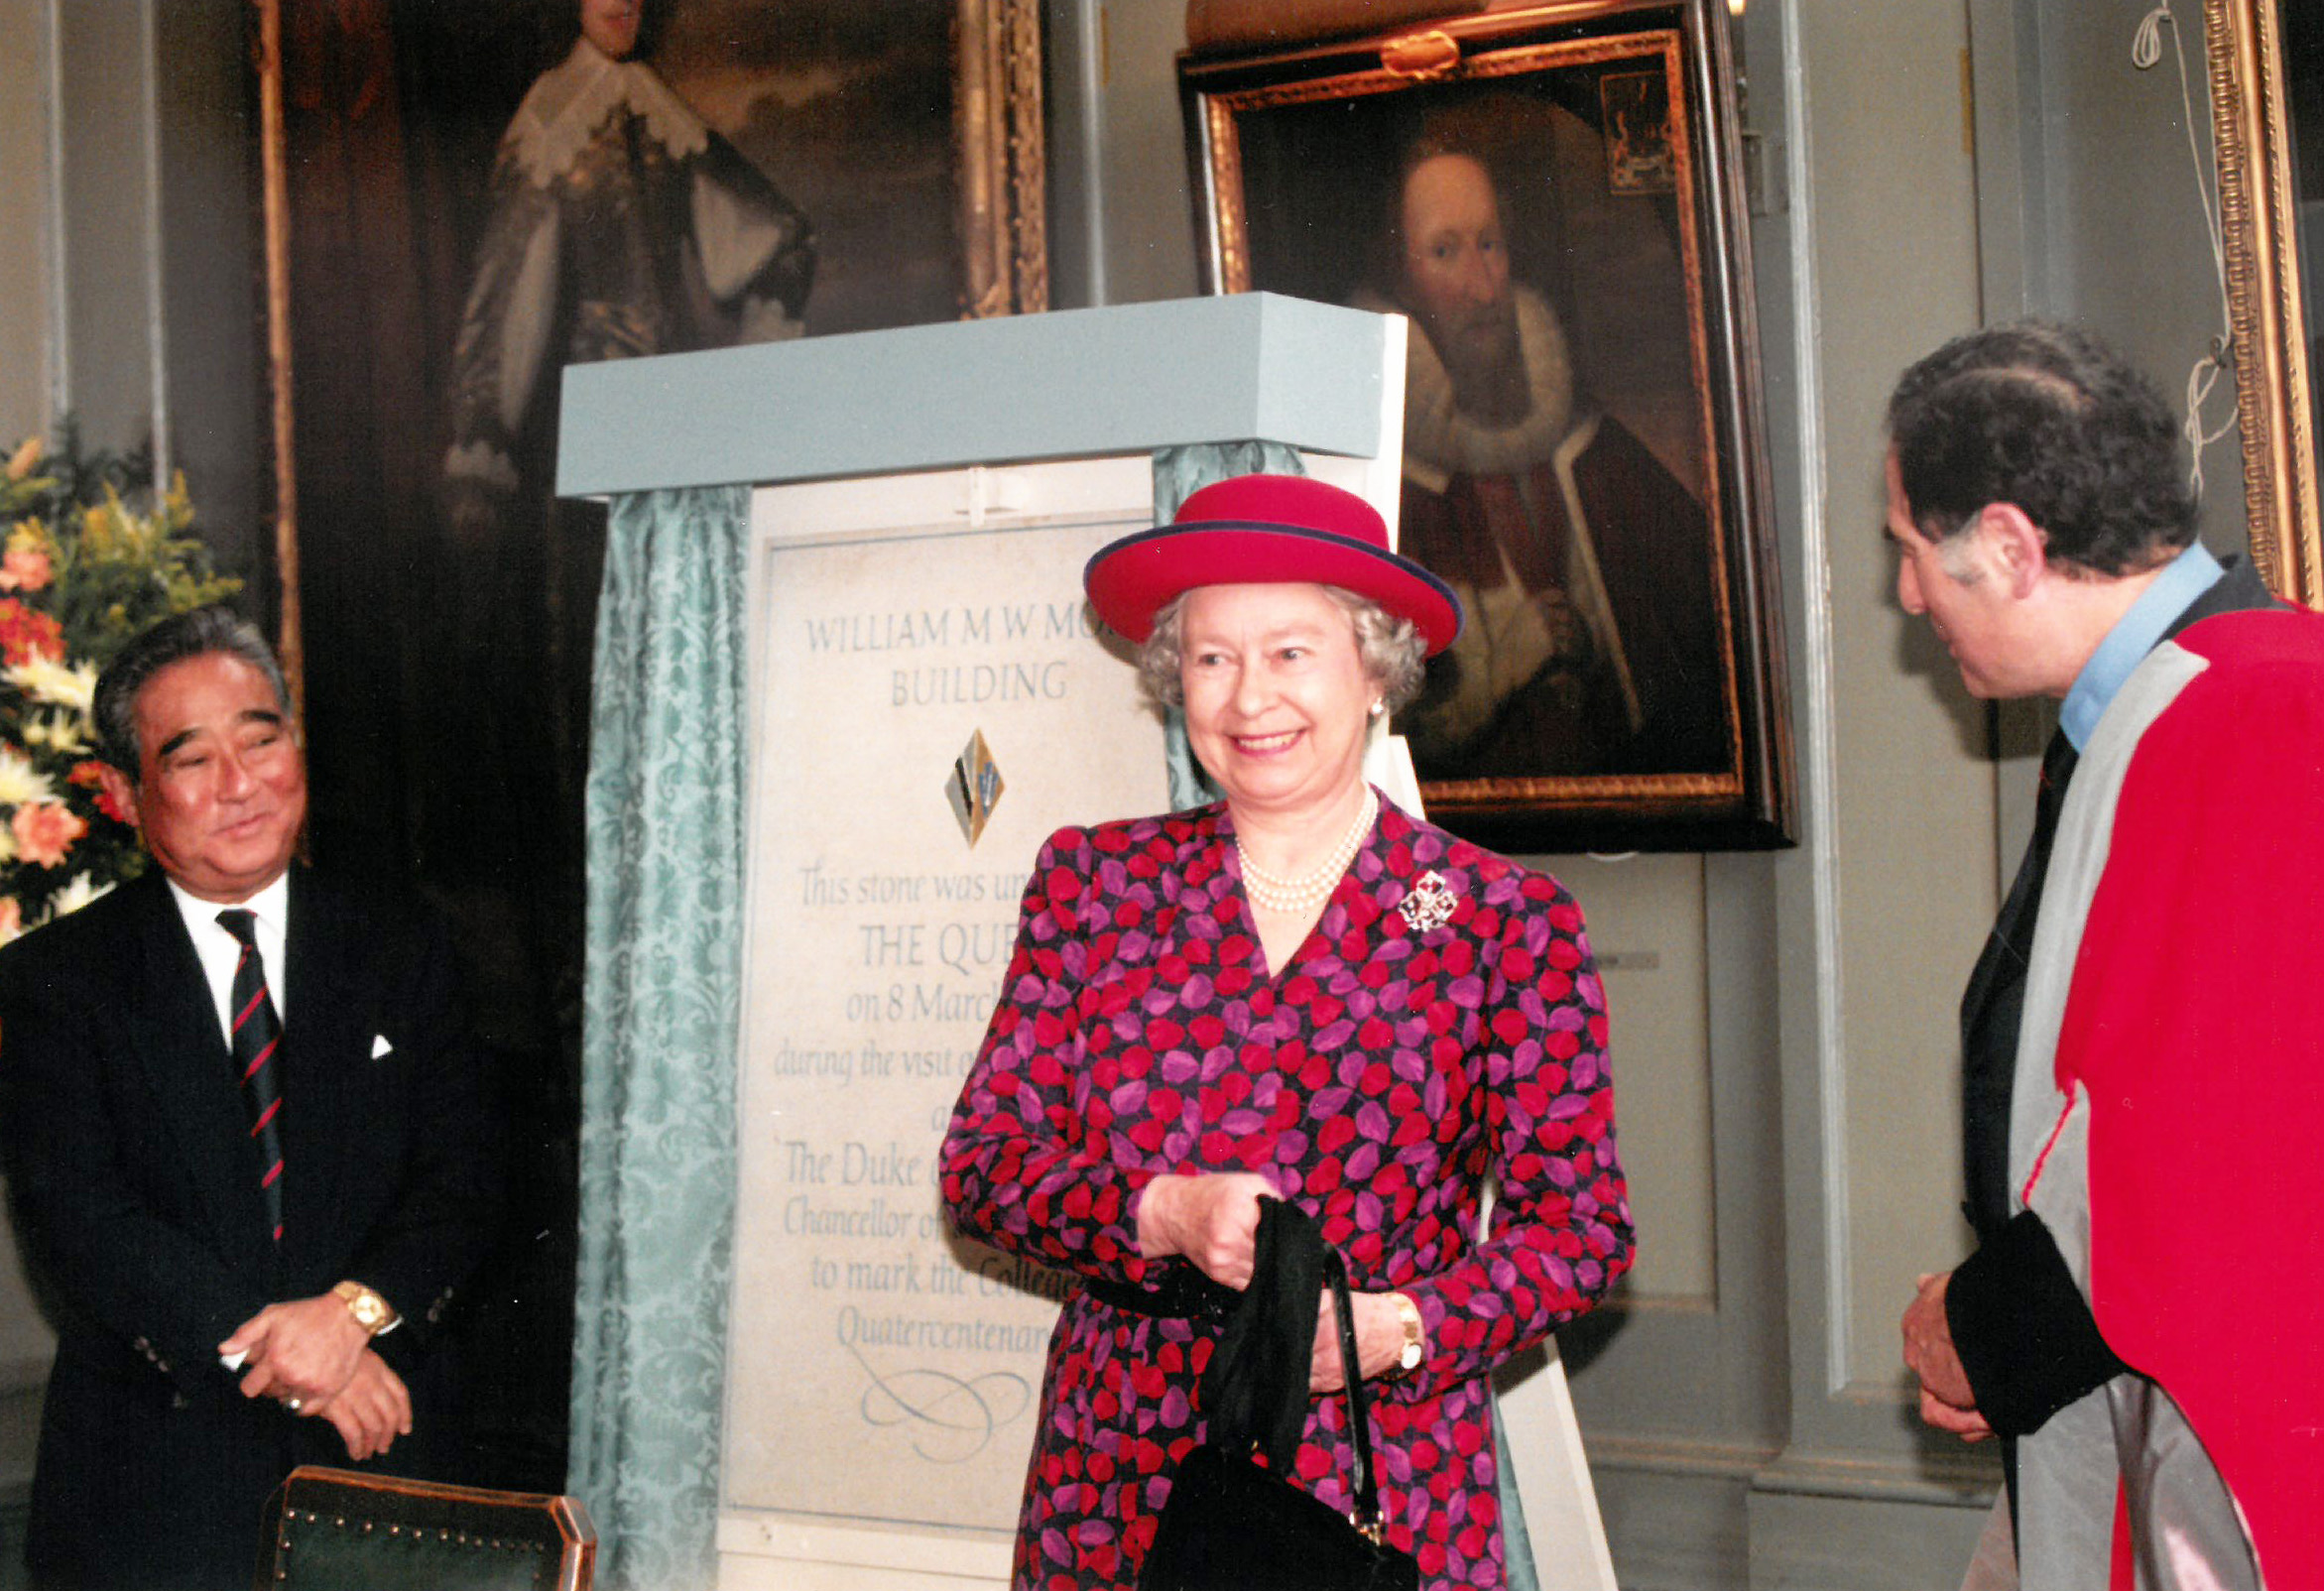 The Queen unveiling of a stone plaque alongside William Mong